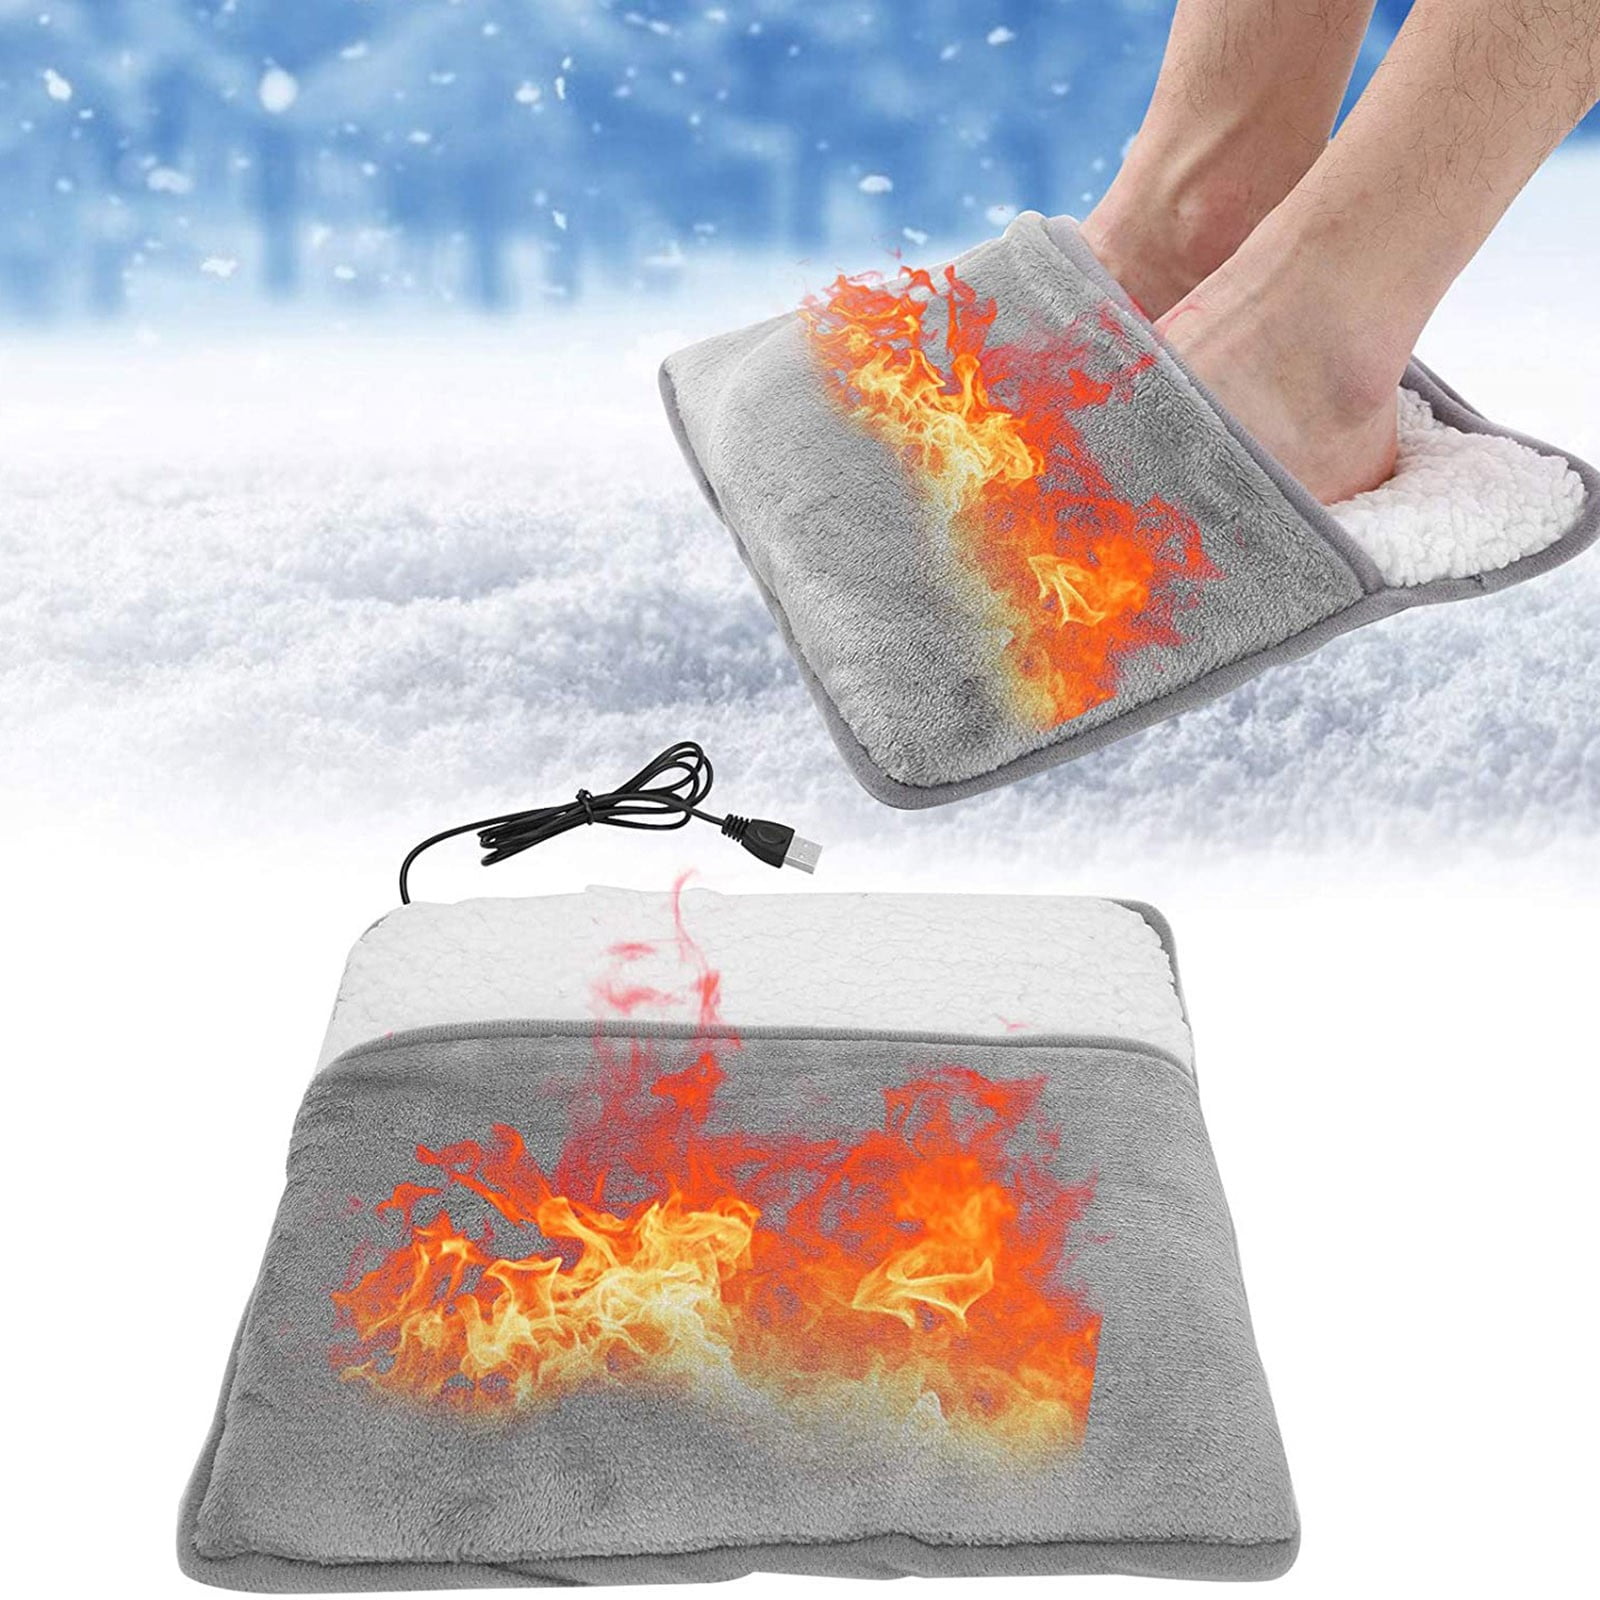 Electric Heated Foot Warmers for Men and Women Foot Heating Pad Electric New 